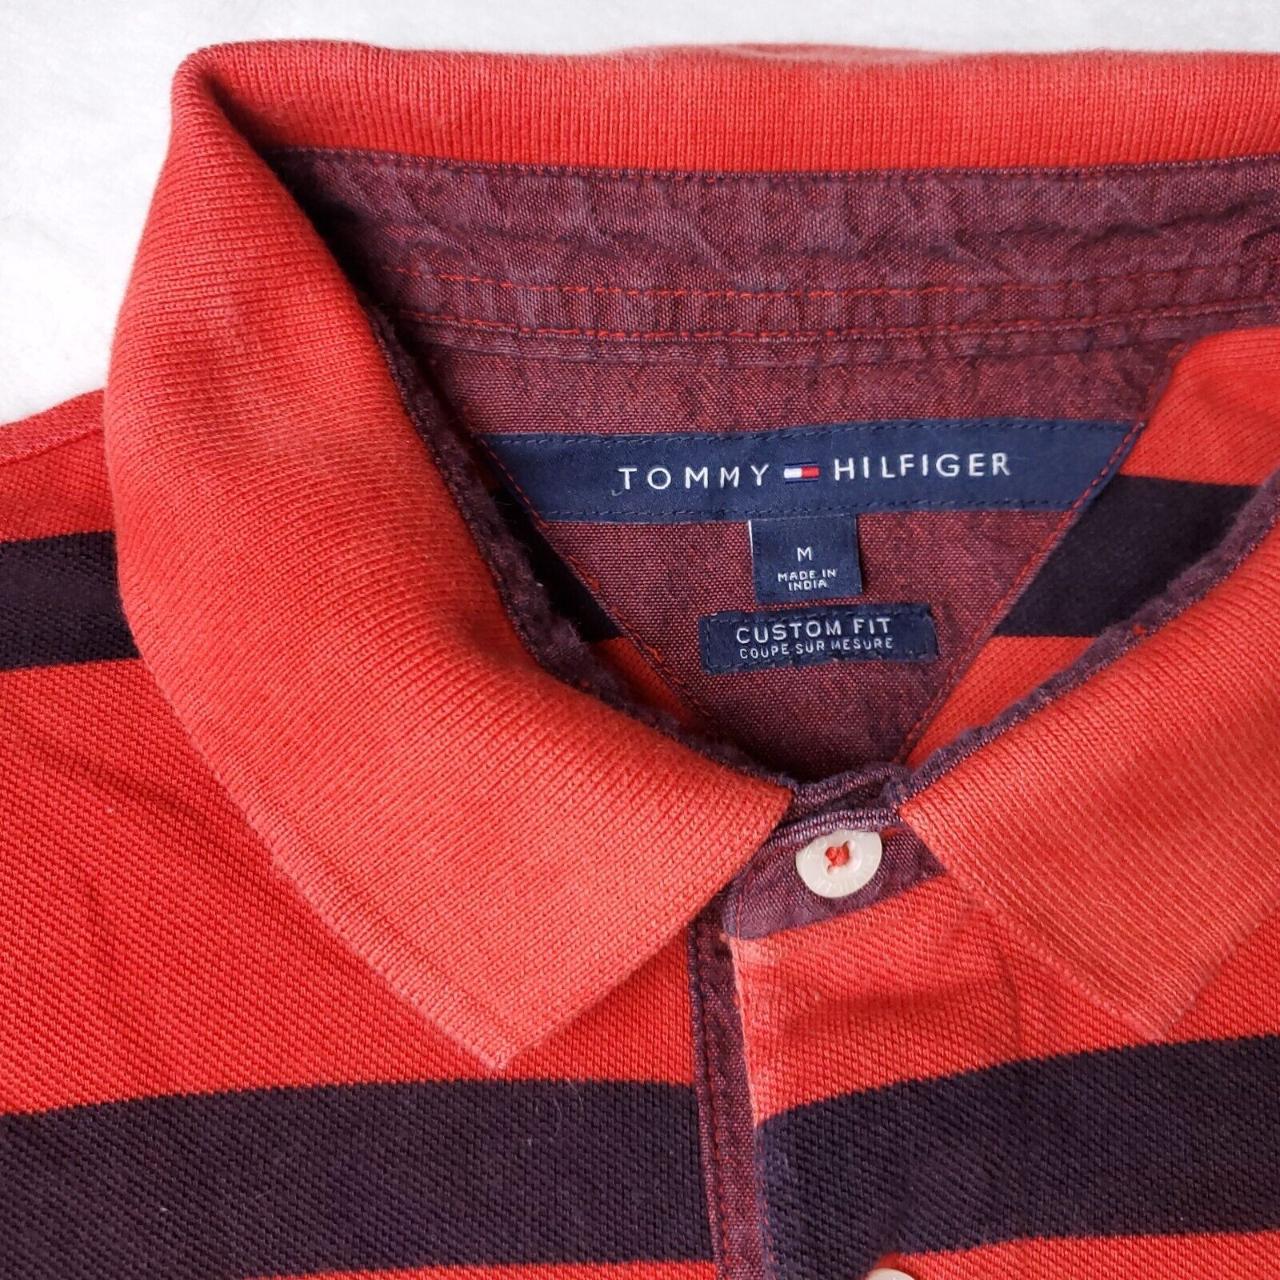 Tommy Hilfiger Mens Shirt Red/Green Striped Coupe Sur Mesure Custom Fit  Medium